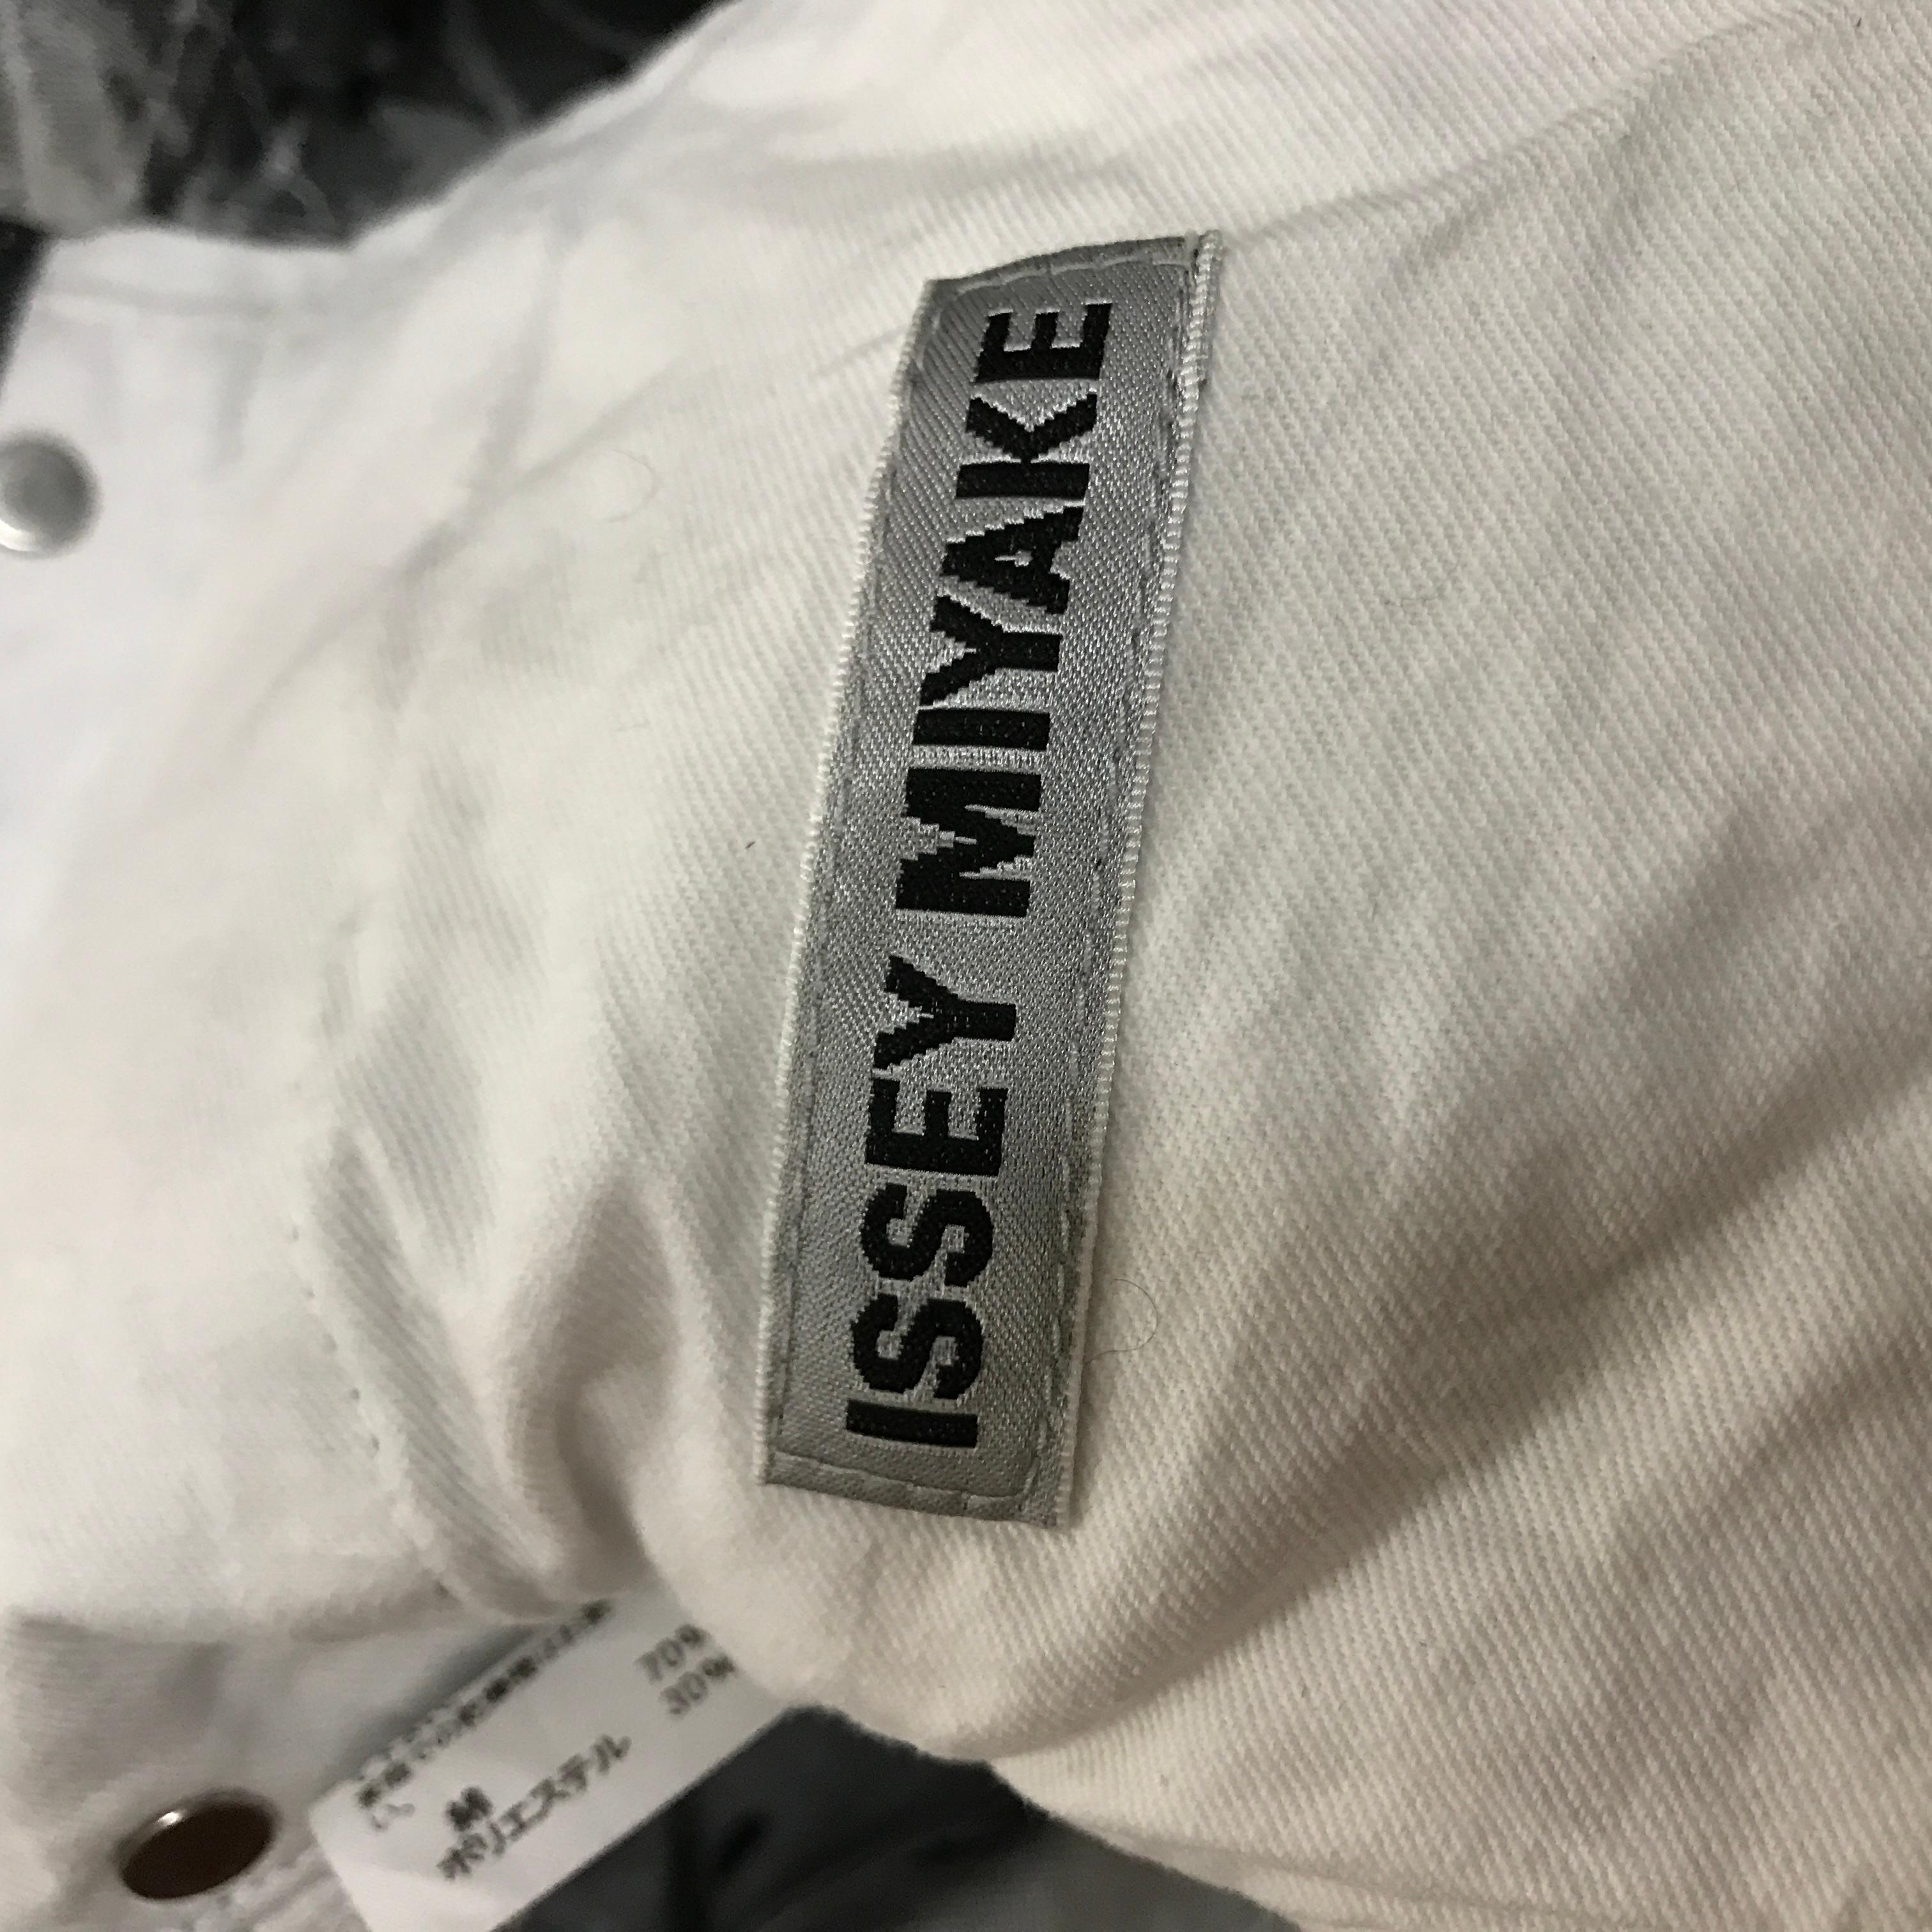 Superb piece from Issey Miyake, with silky smooth mixed cotton outerior.

Condition: 9/10, no significant signs of usage.

Size: 2, but fits a mens 28